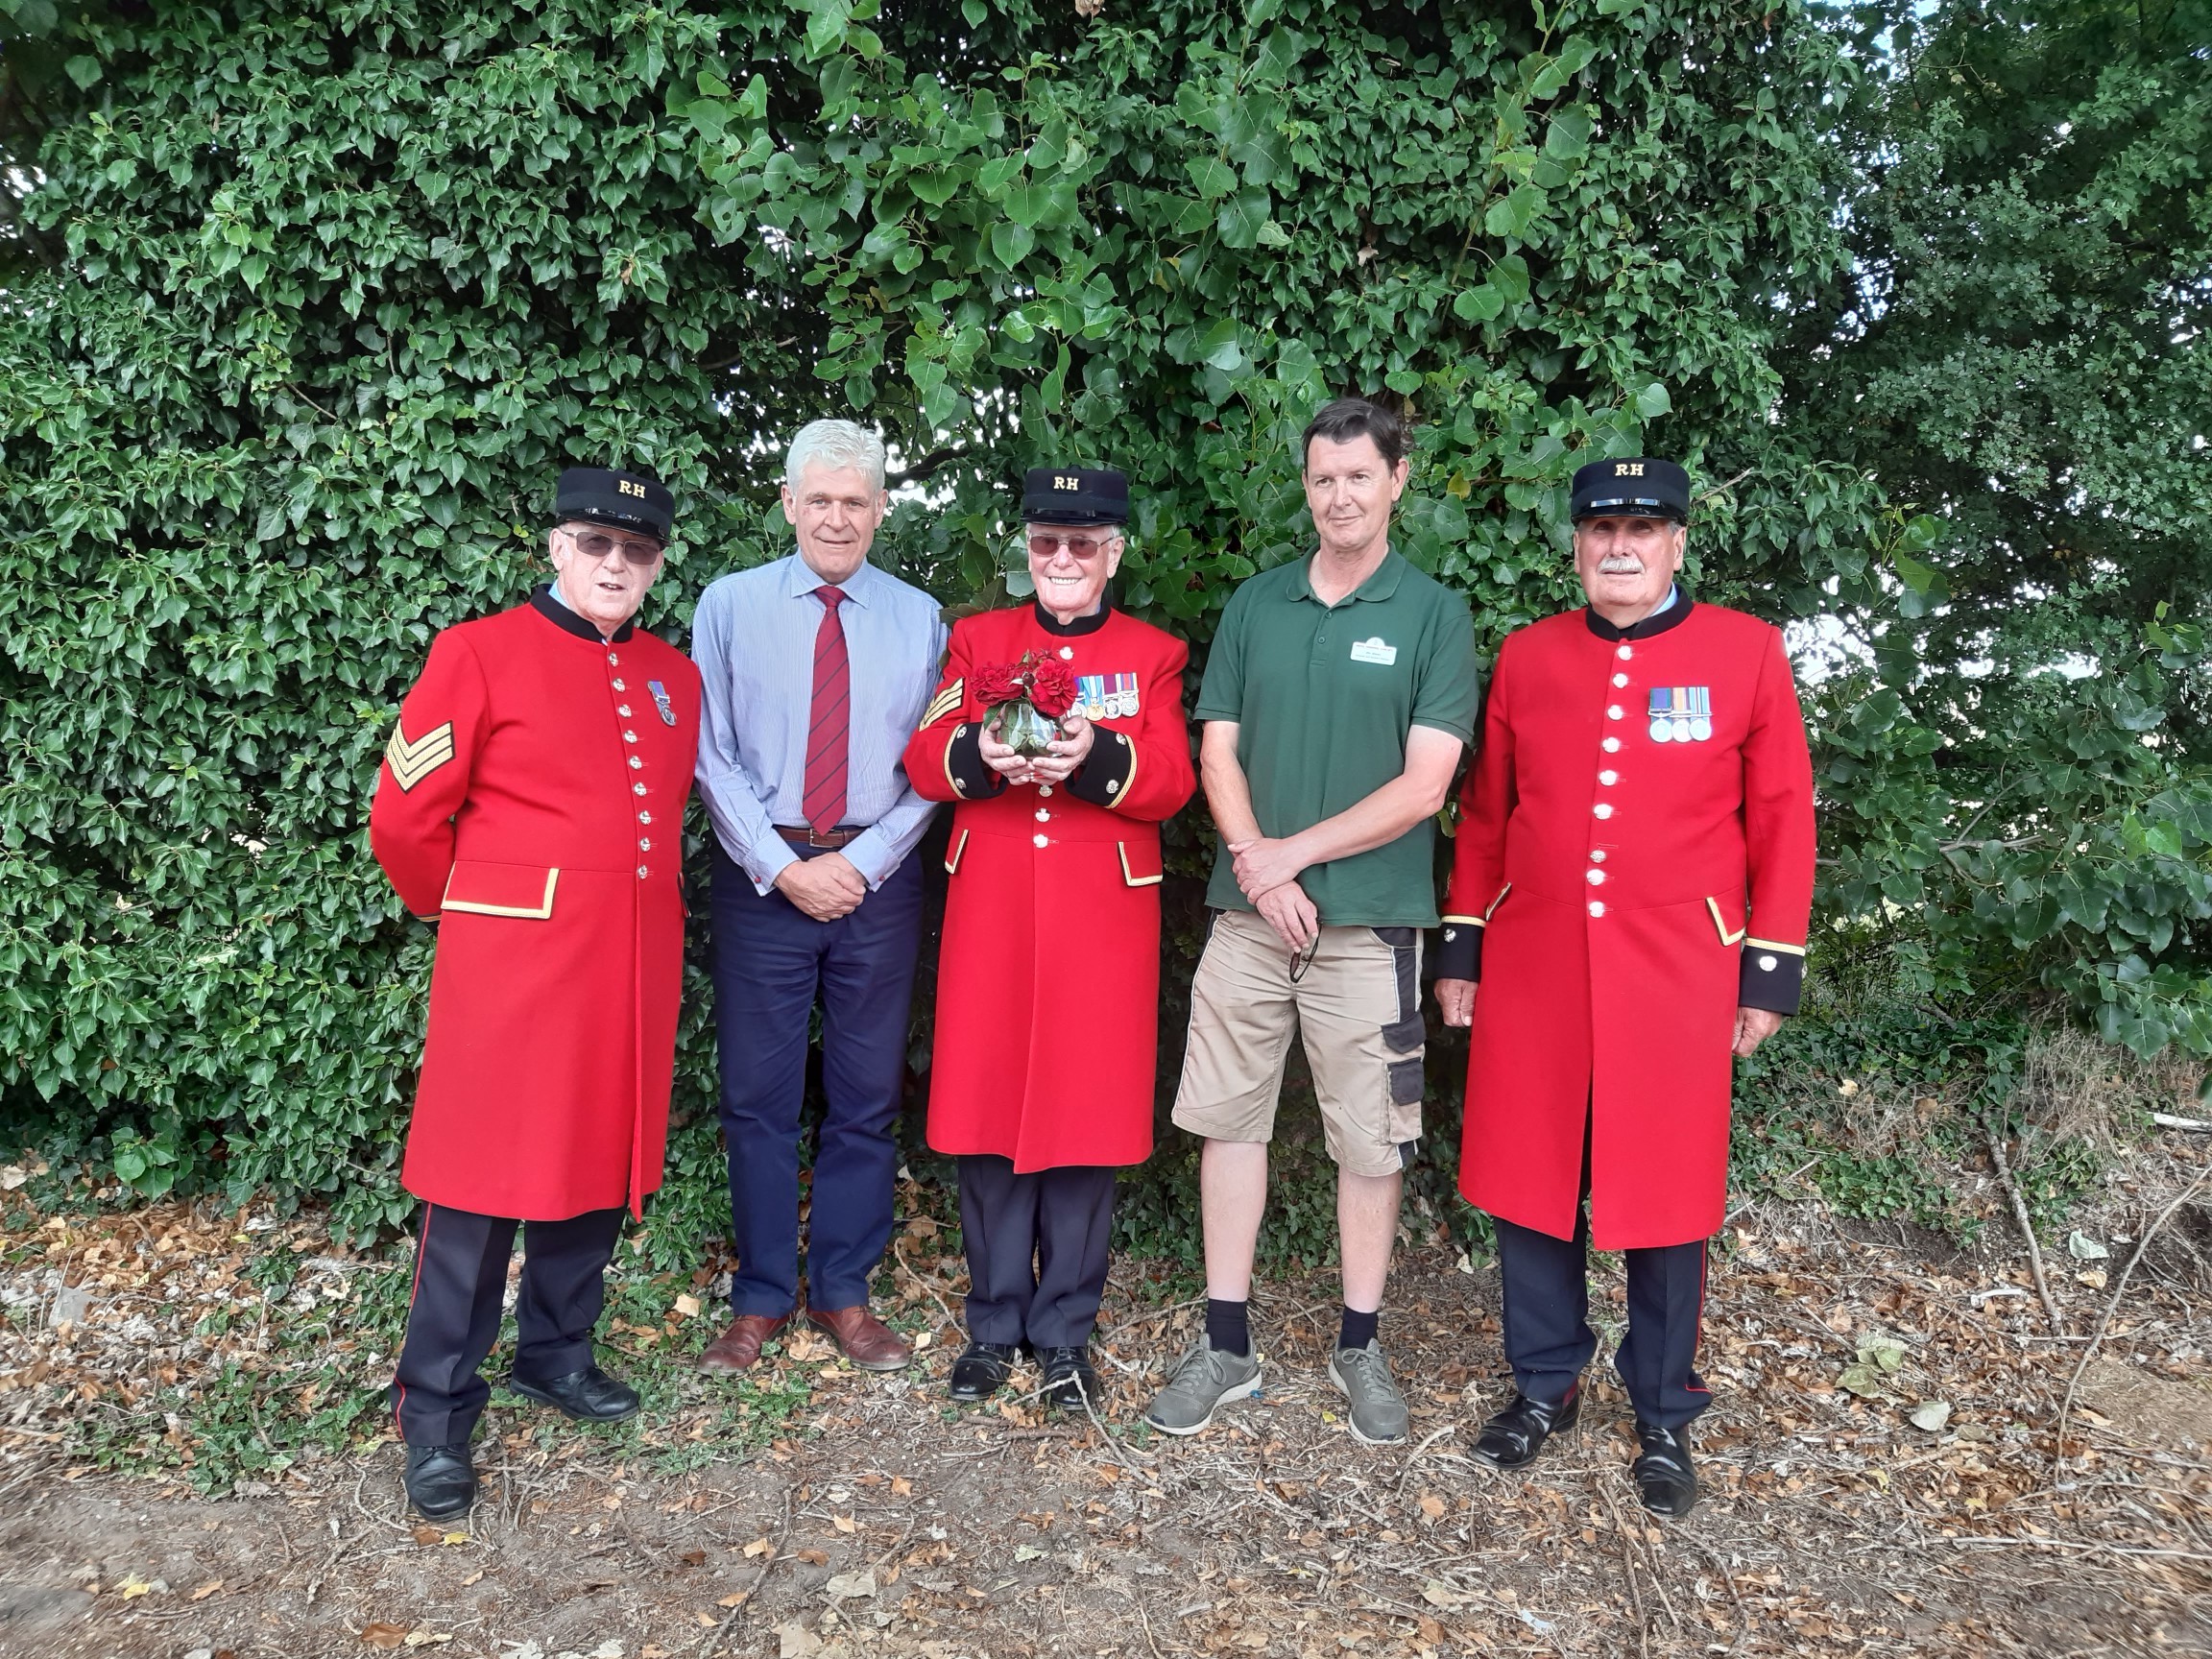 The rose selection panel: Pensioners John, Patrick and Arthur (from left to right) with Quartermaster Nicky and Head of Grounds Ric 